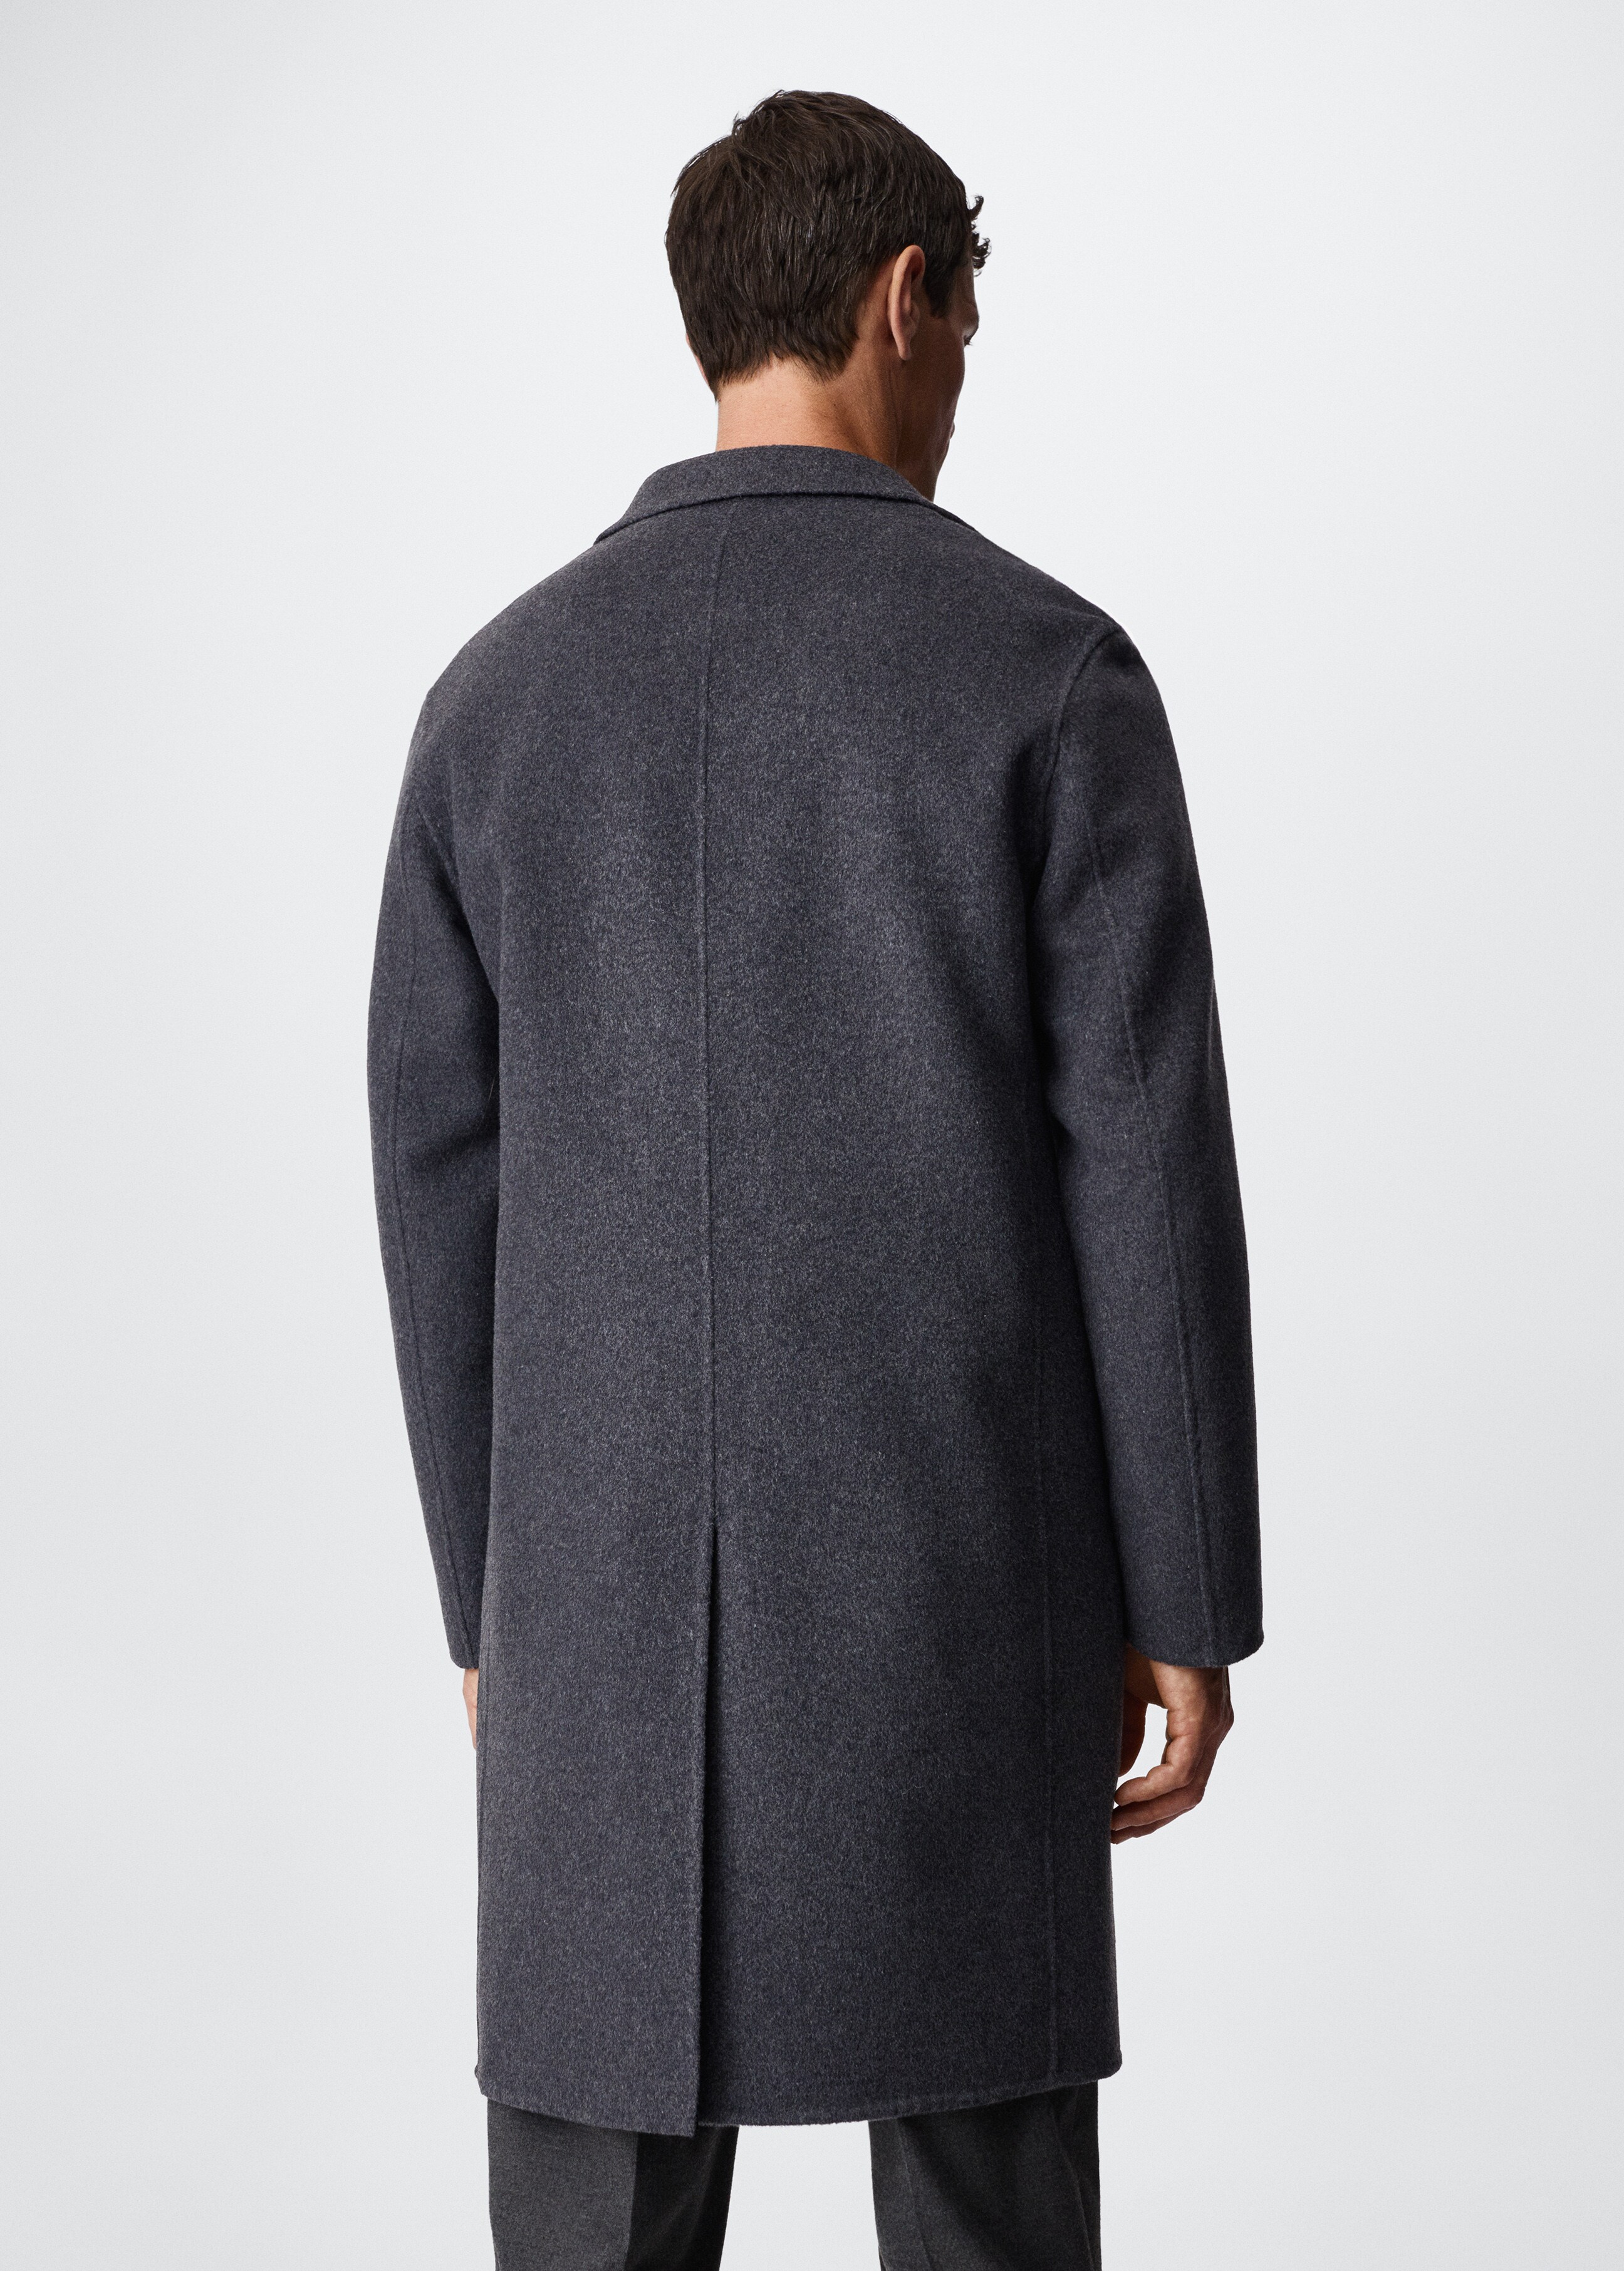 Handmade recycled wool coat - Reverse of the article